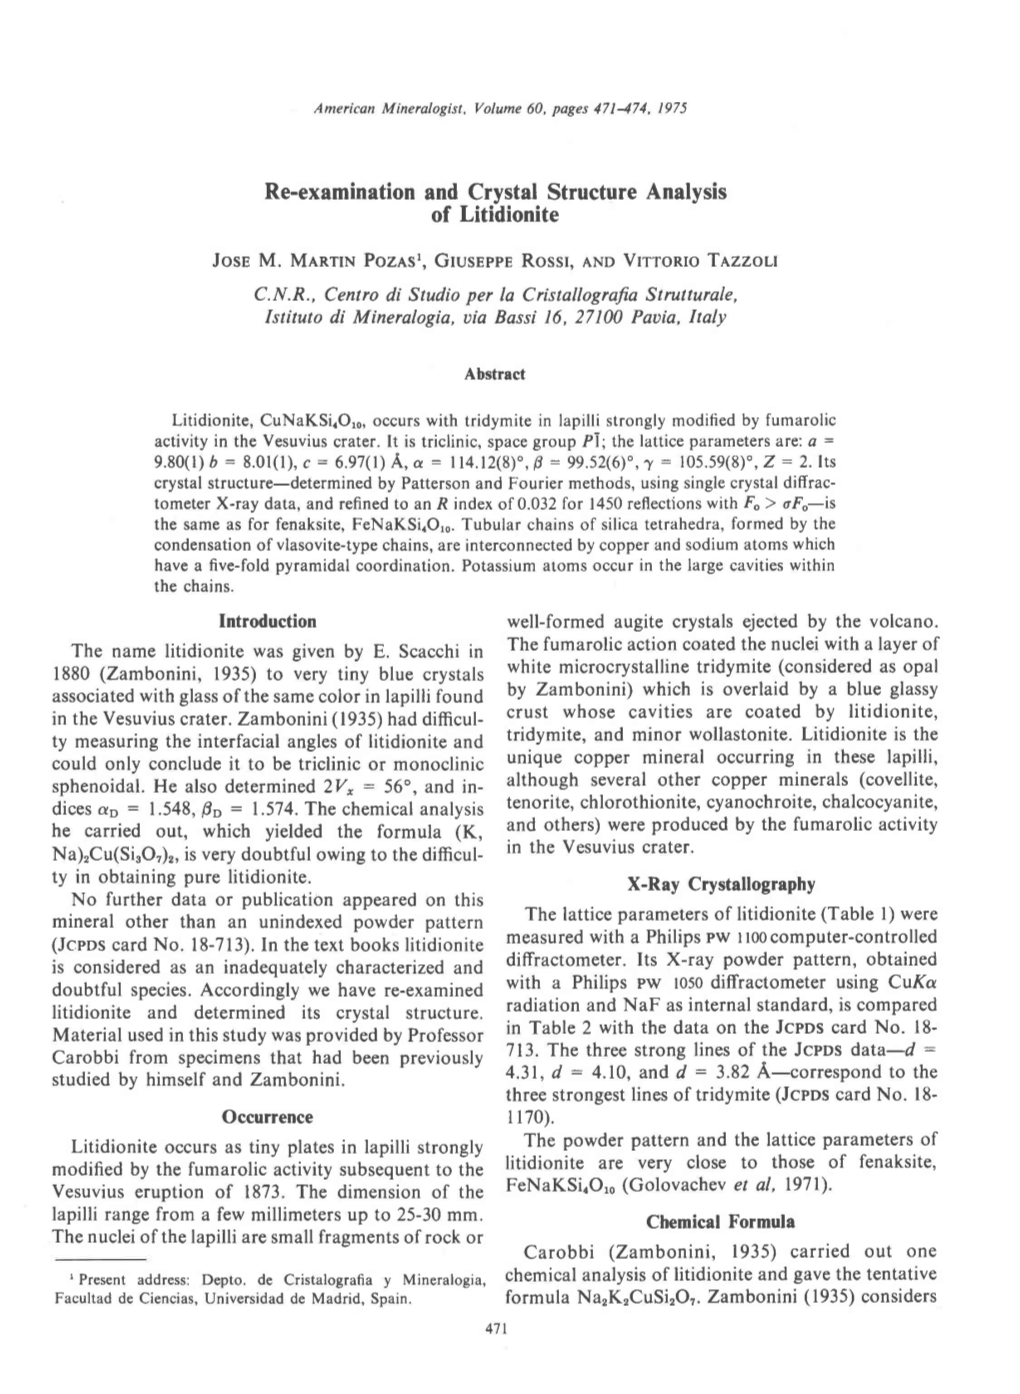 Re-Examination and Crystal Structure Analysis of Litidionite